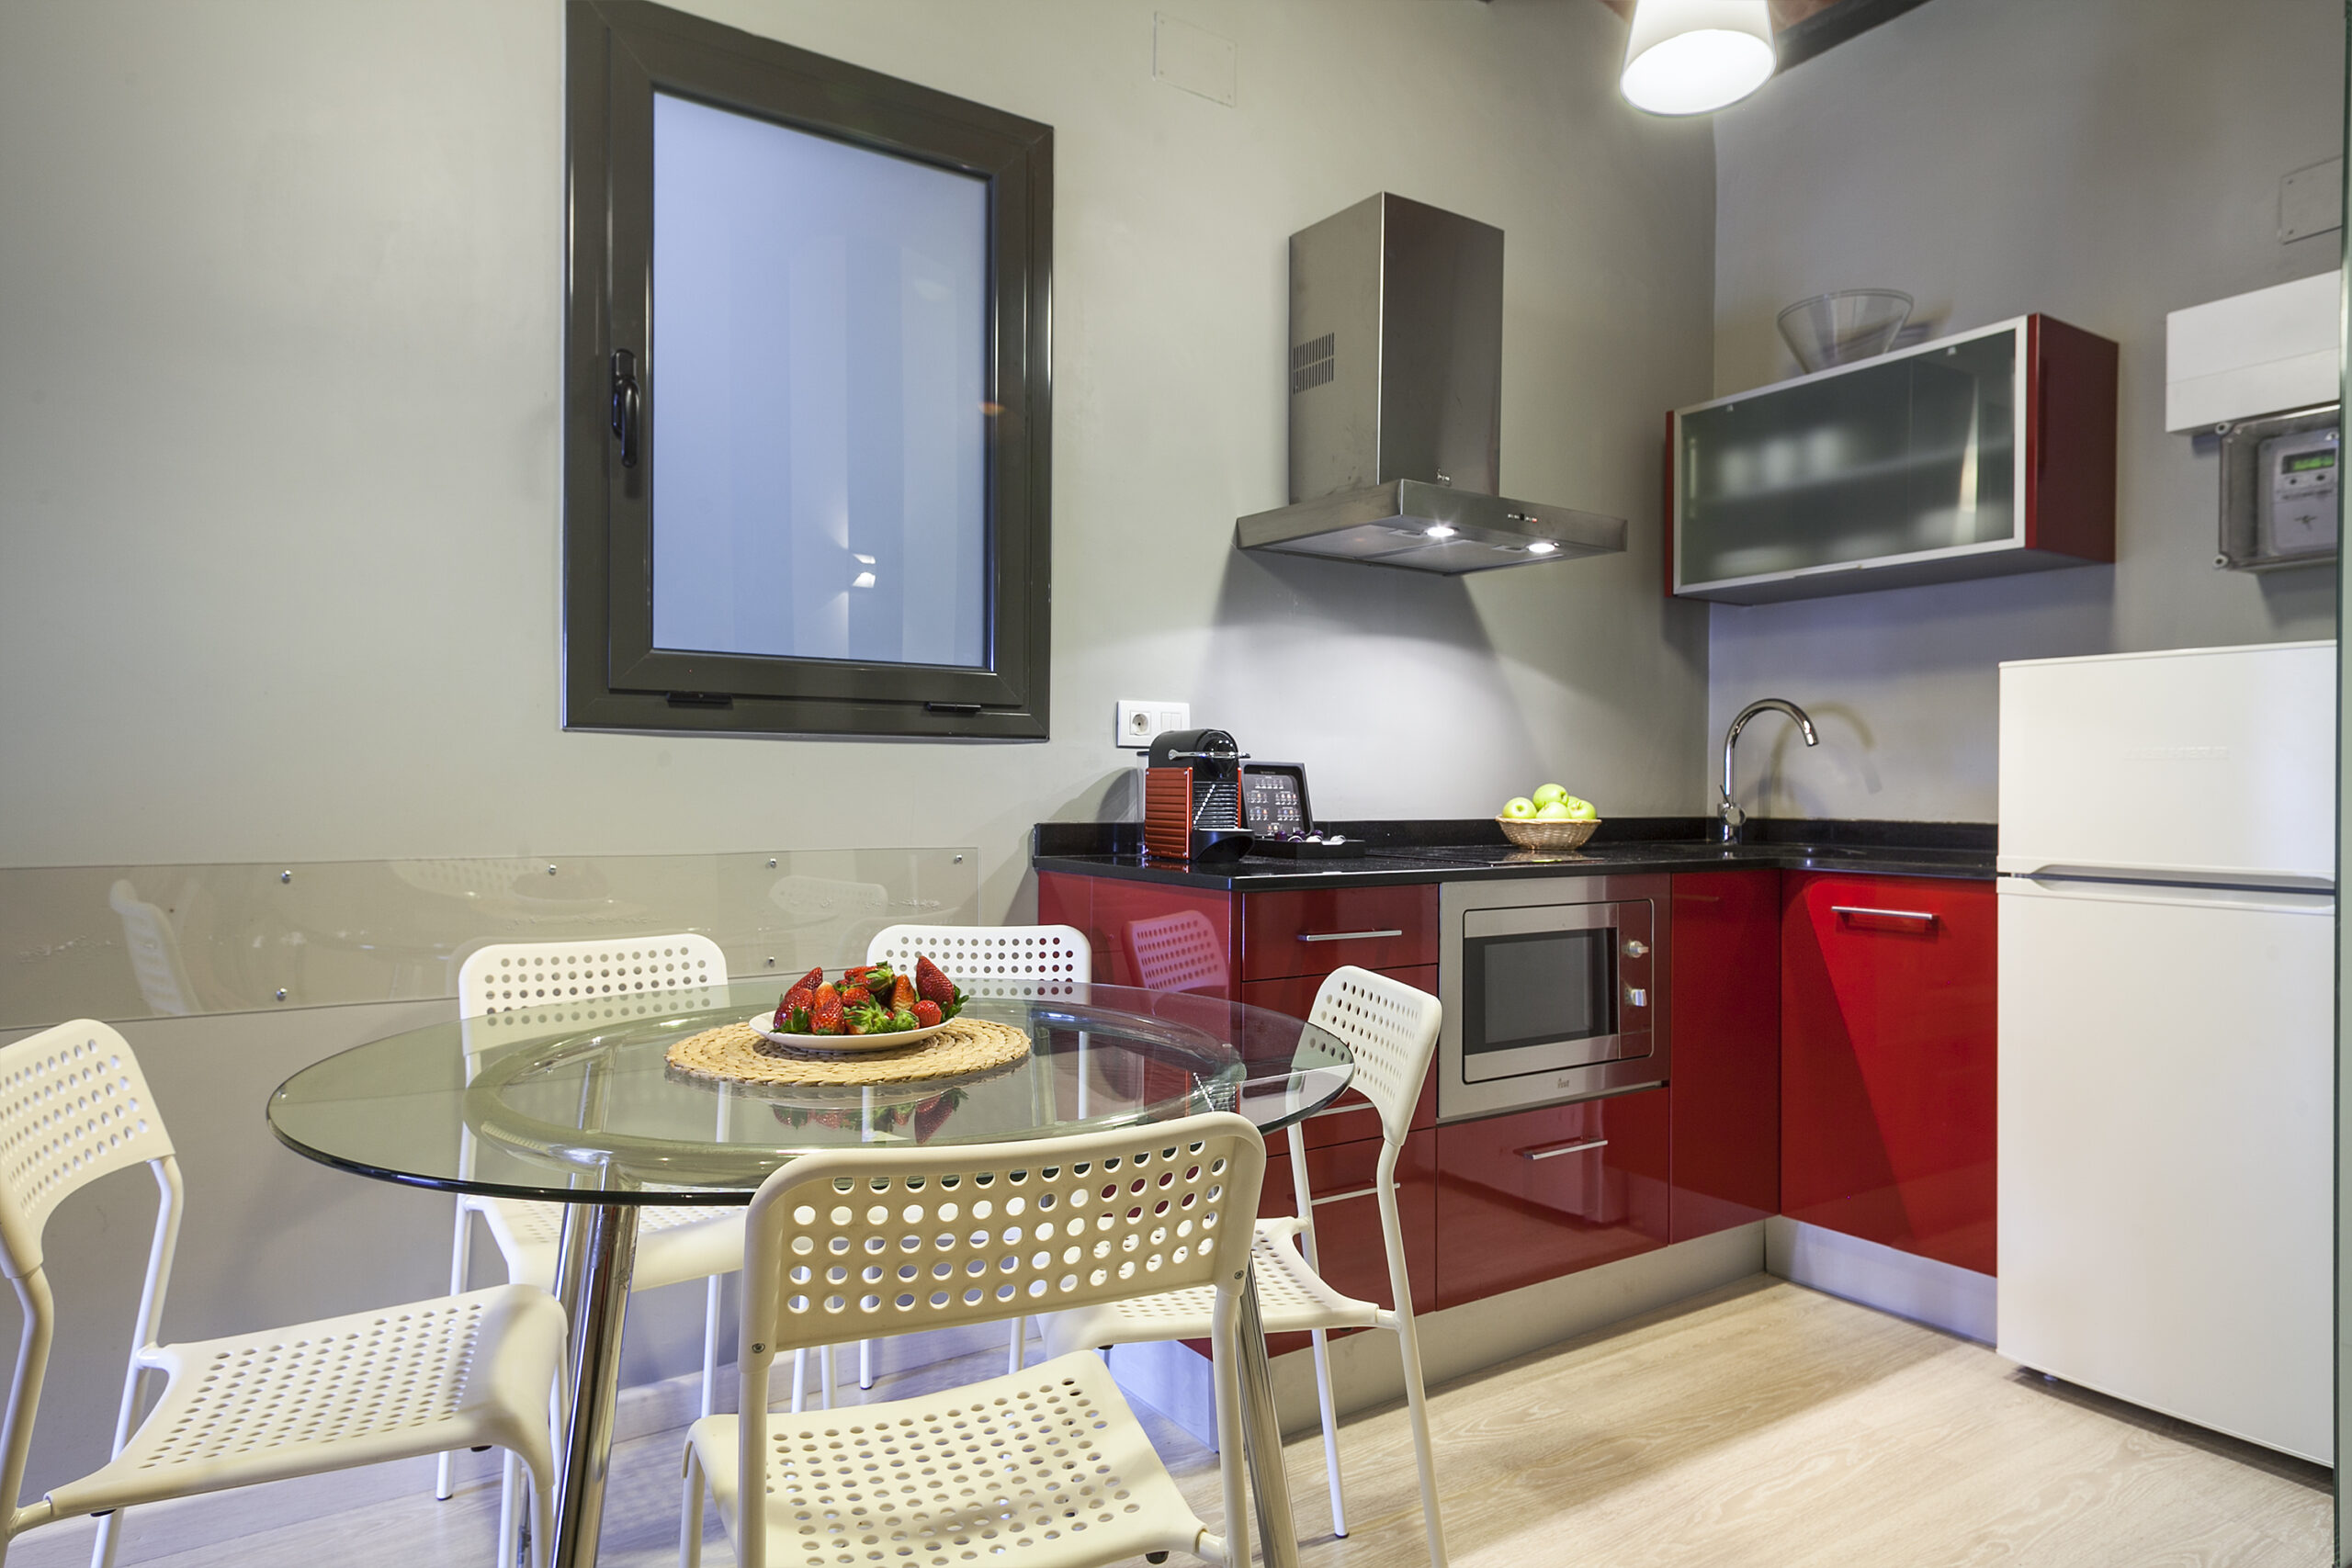 Apartment to rent in Fira Barcelona by MyRentalHost